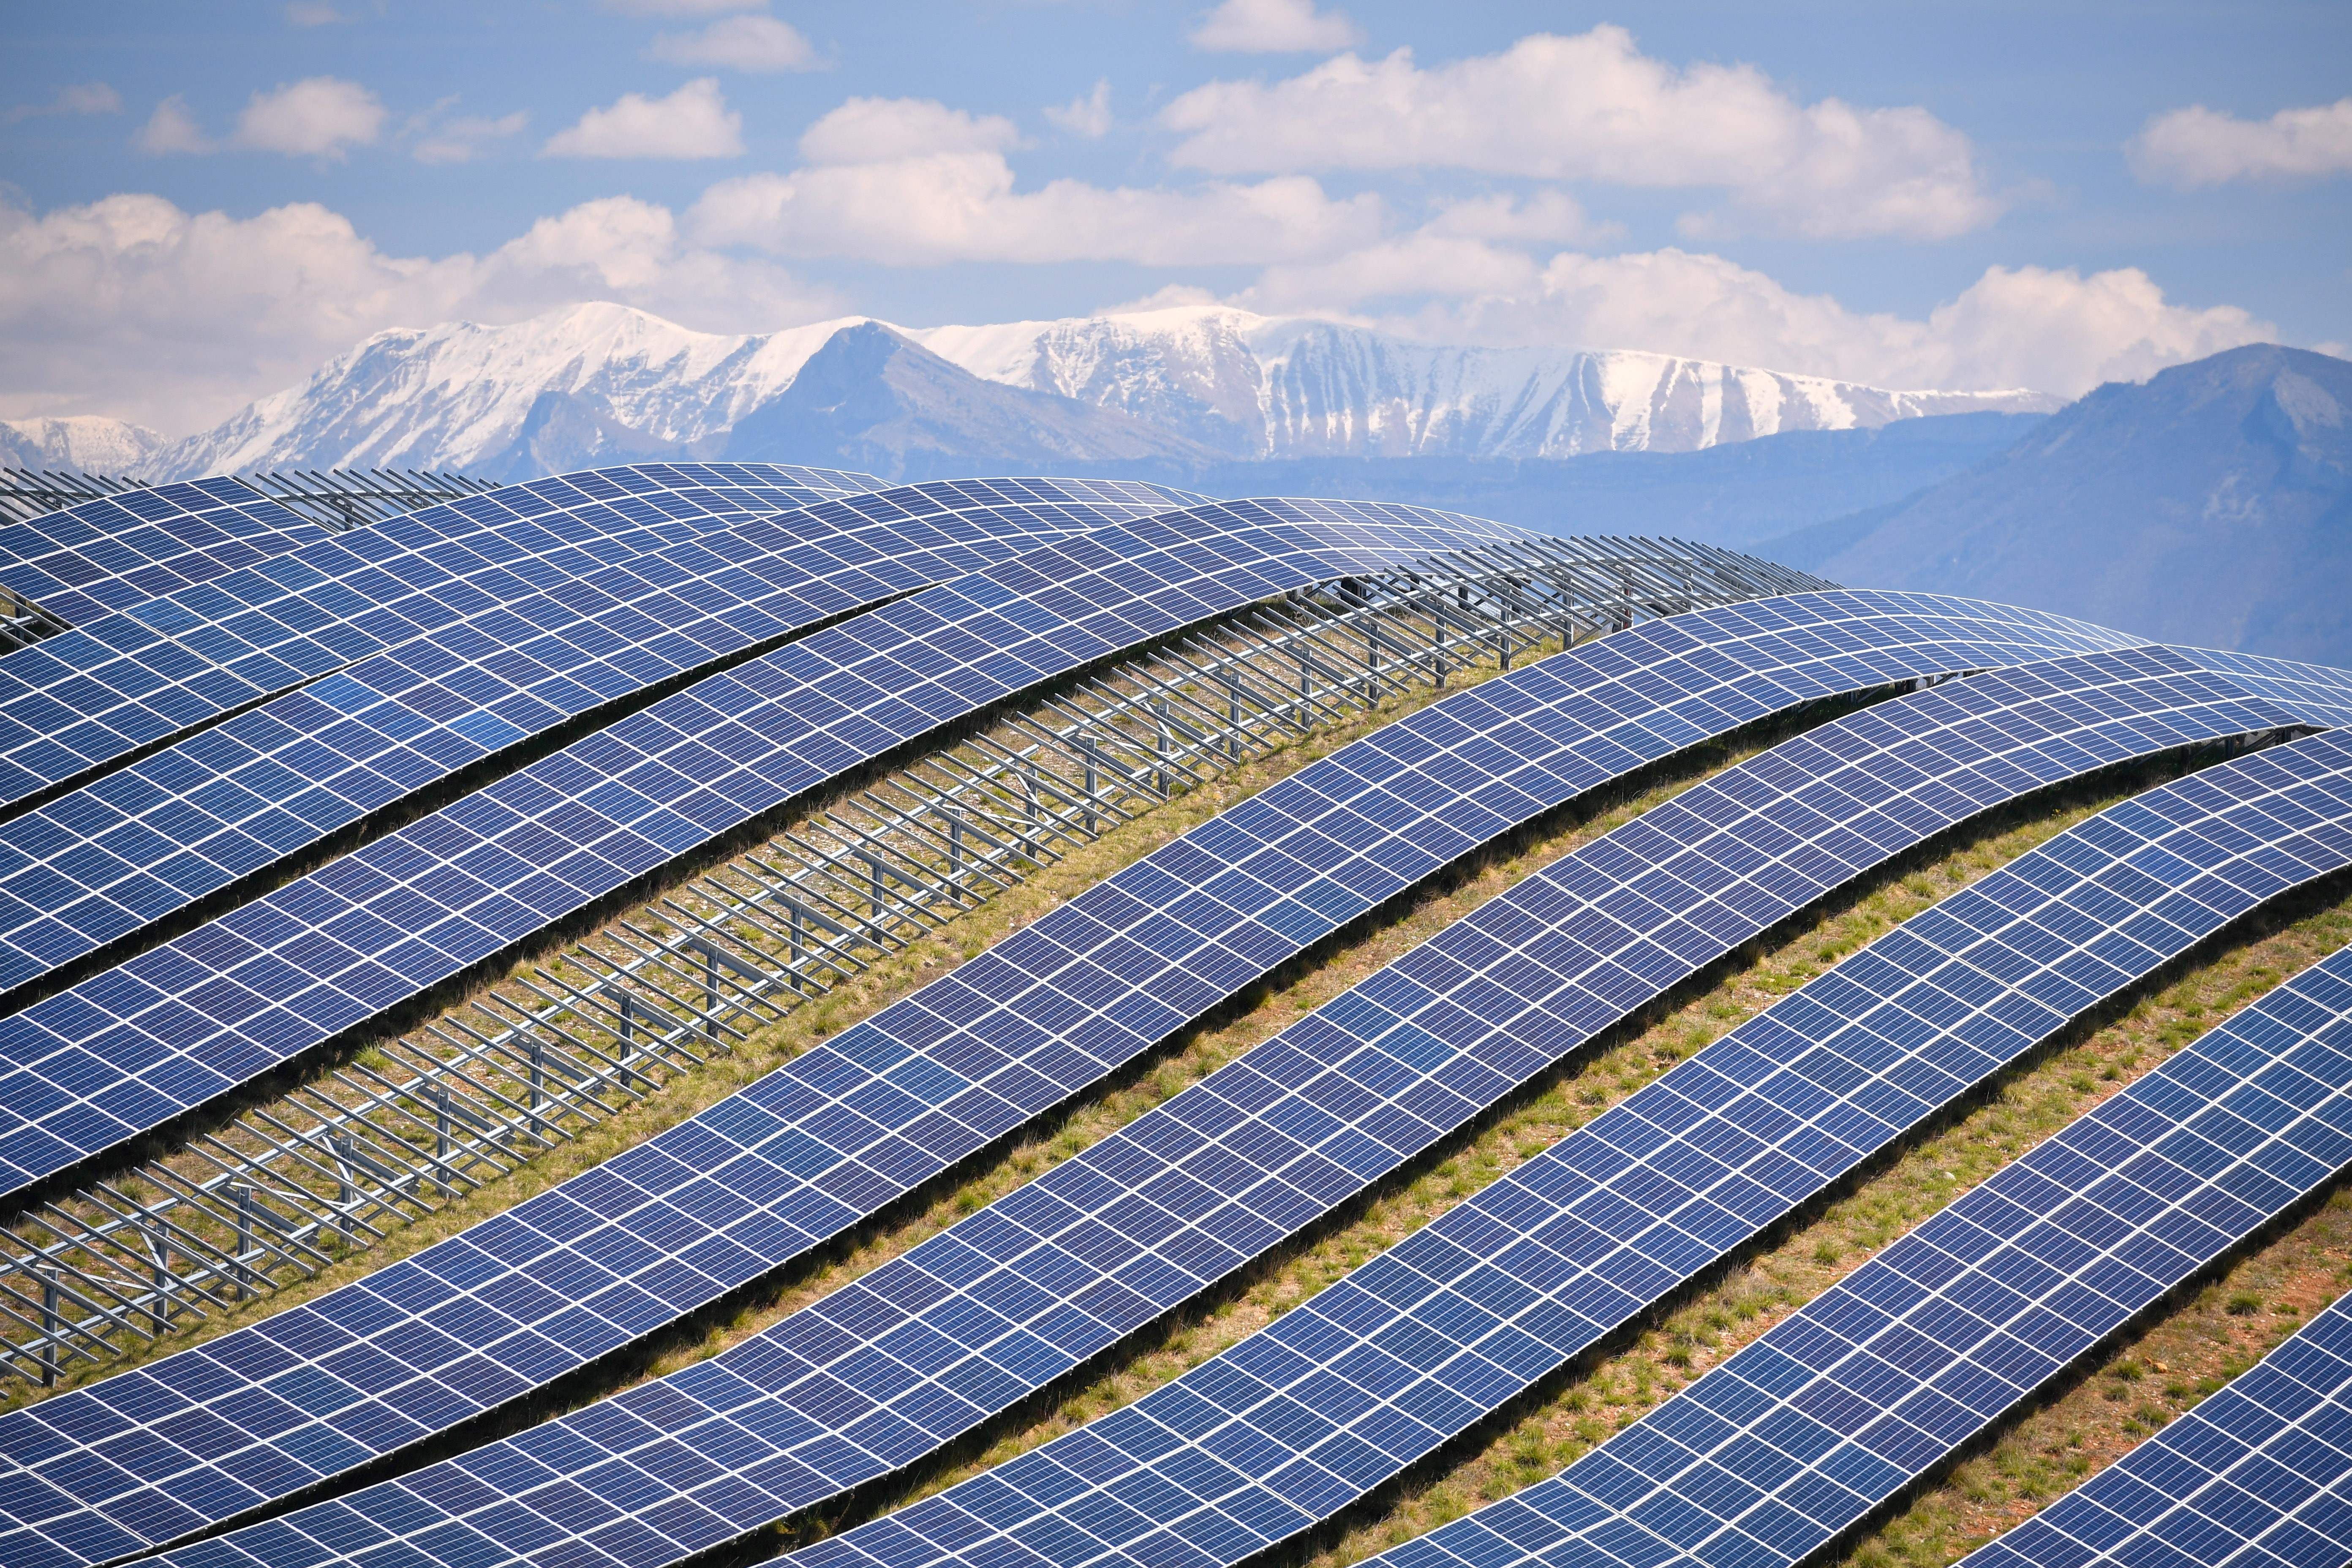 Long lines of solar panels follow the curve of a hillside, with snowcapped mountains in the distance.